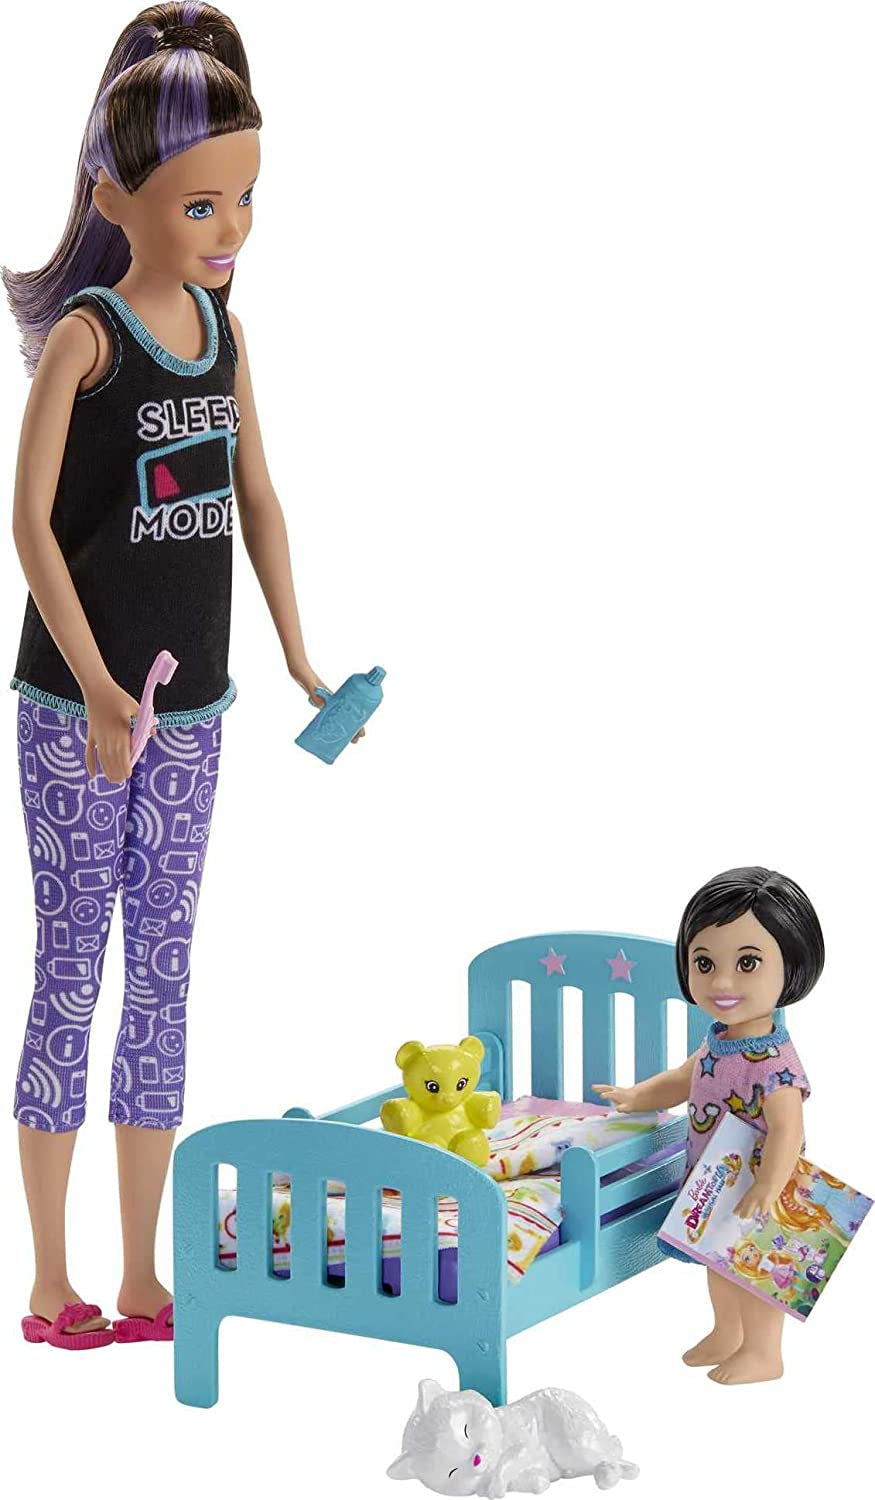 Barbie Babysitting Playset with Skipper Doll, Baby Doll, Bouncy Stroller and Themed Accessories for 3 to 7 Year Olds, FJB00 - Amazon Exclusive